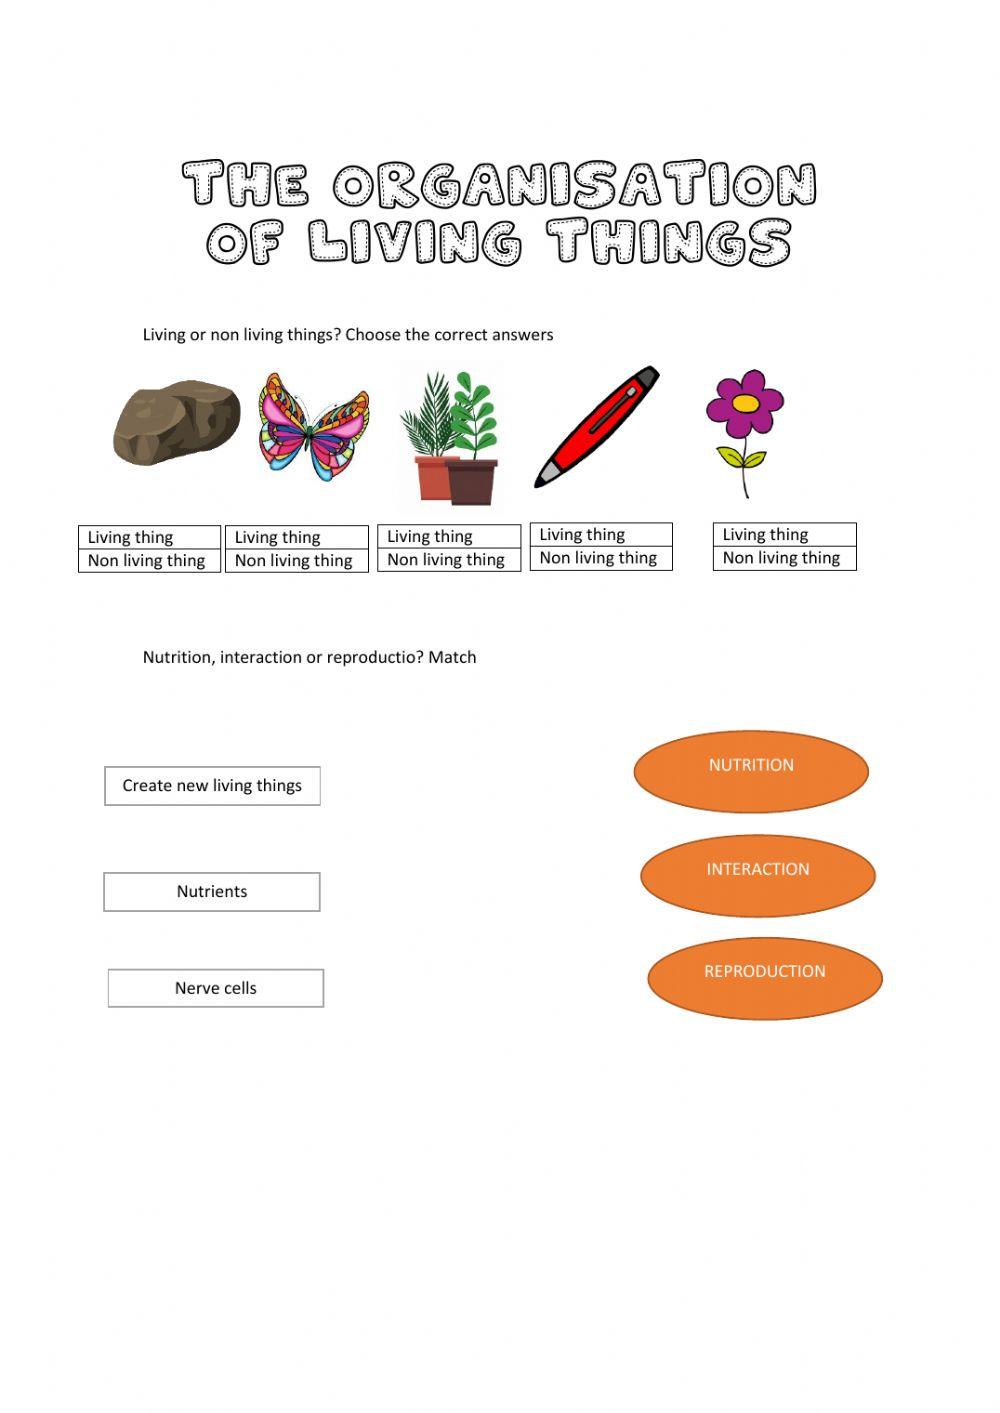 The organisation of living things